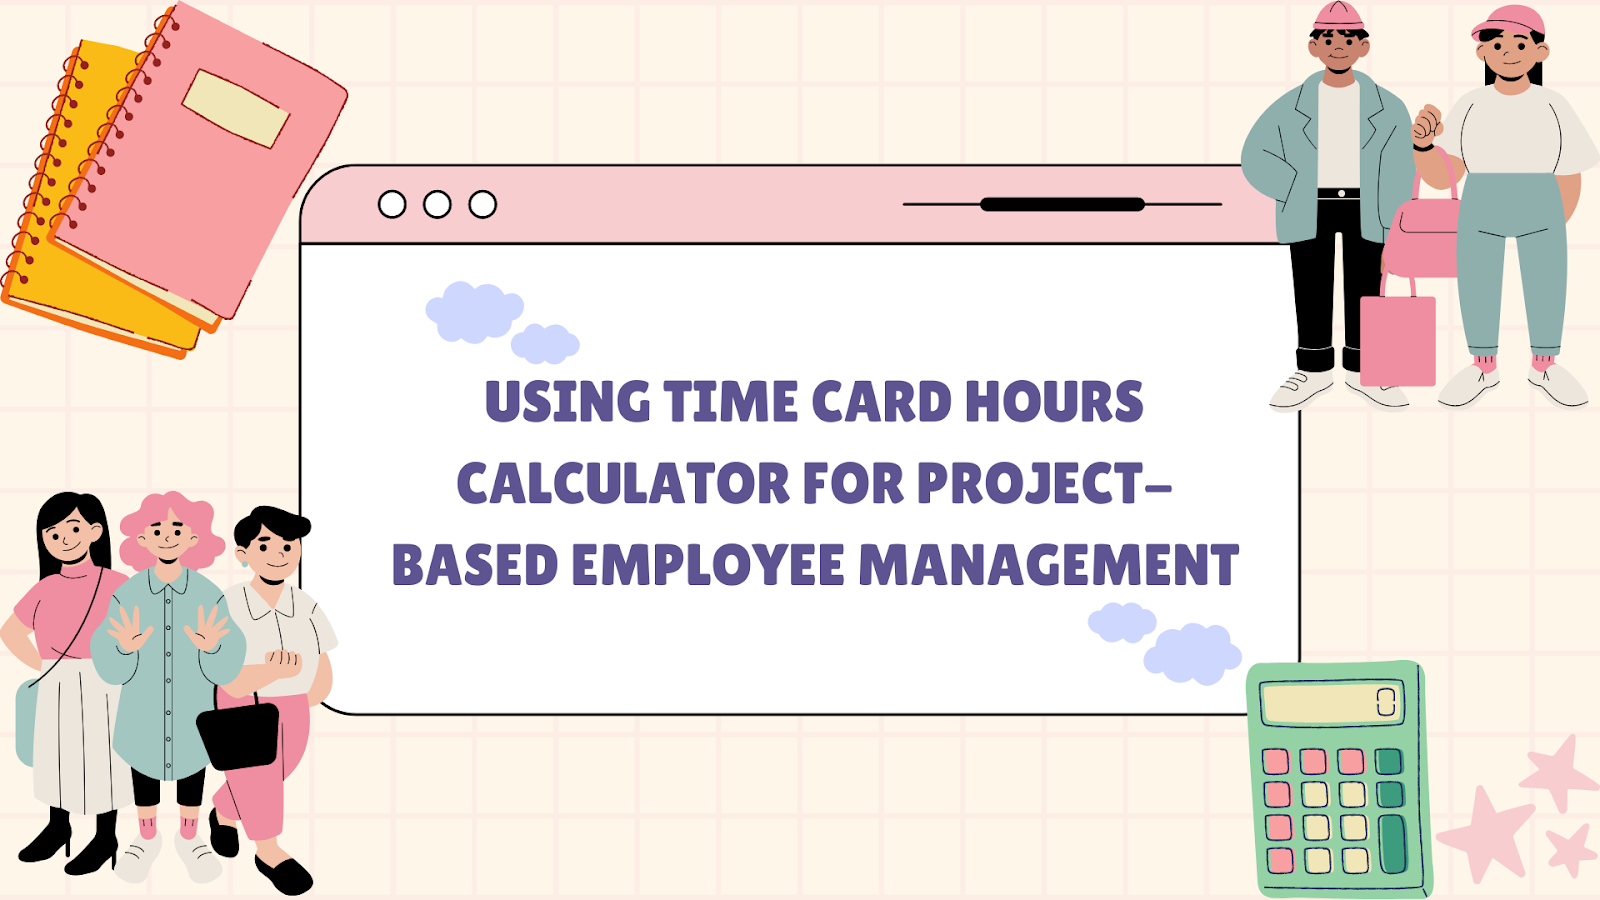 Using Time Card Hours Calculator for Project-Based Employee Management